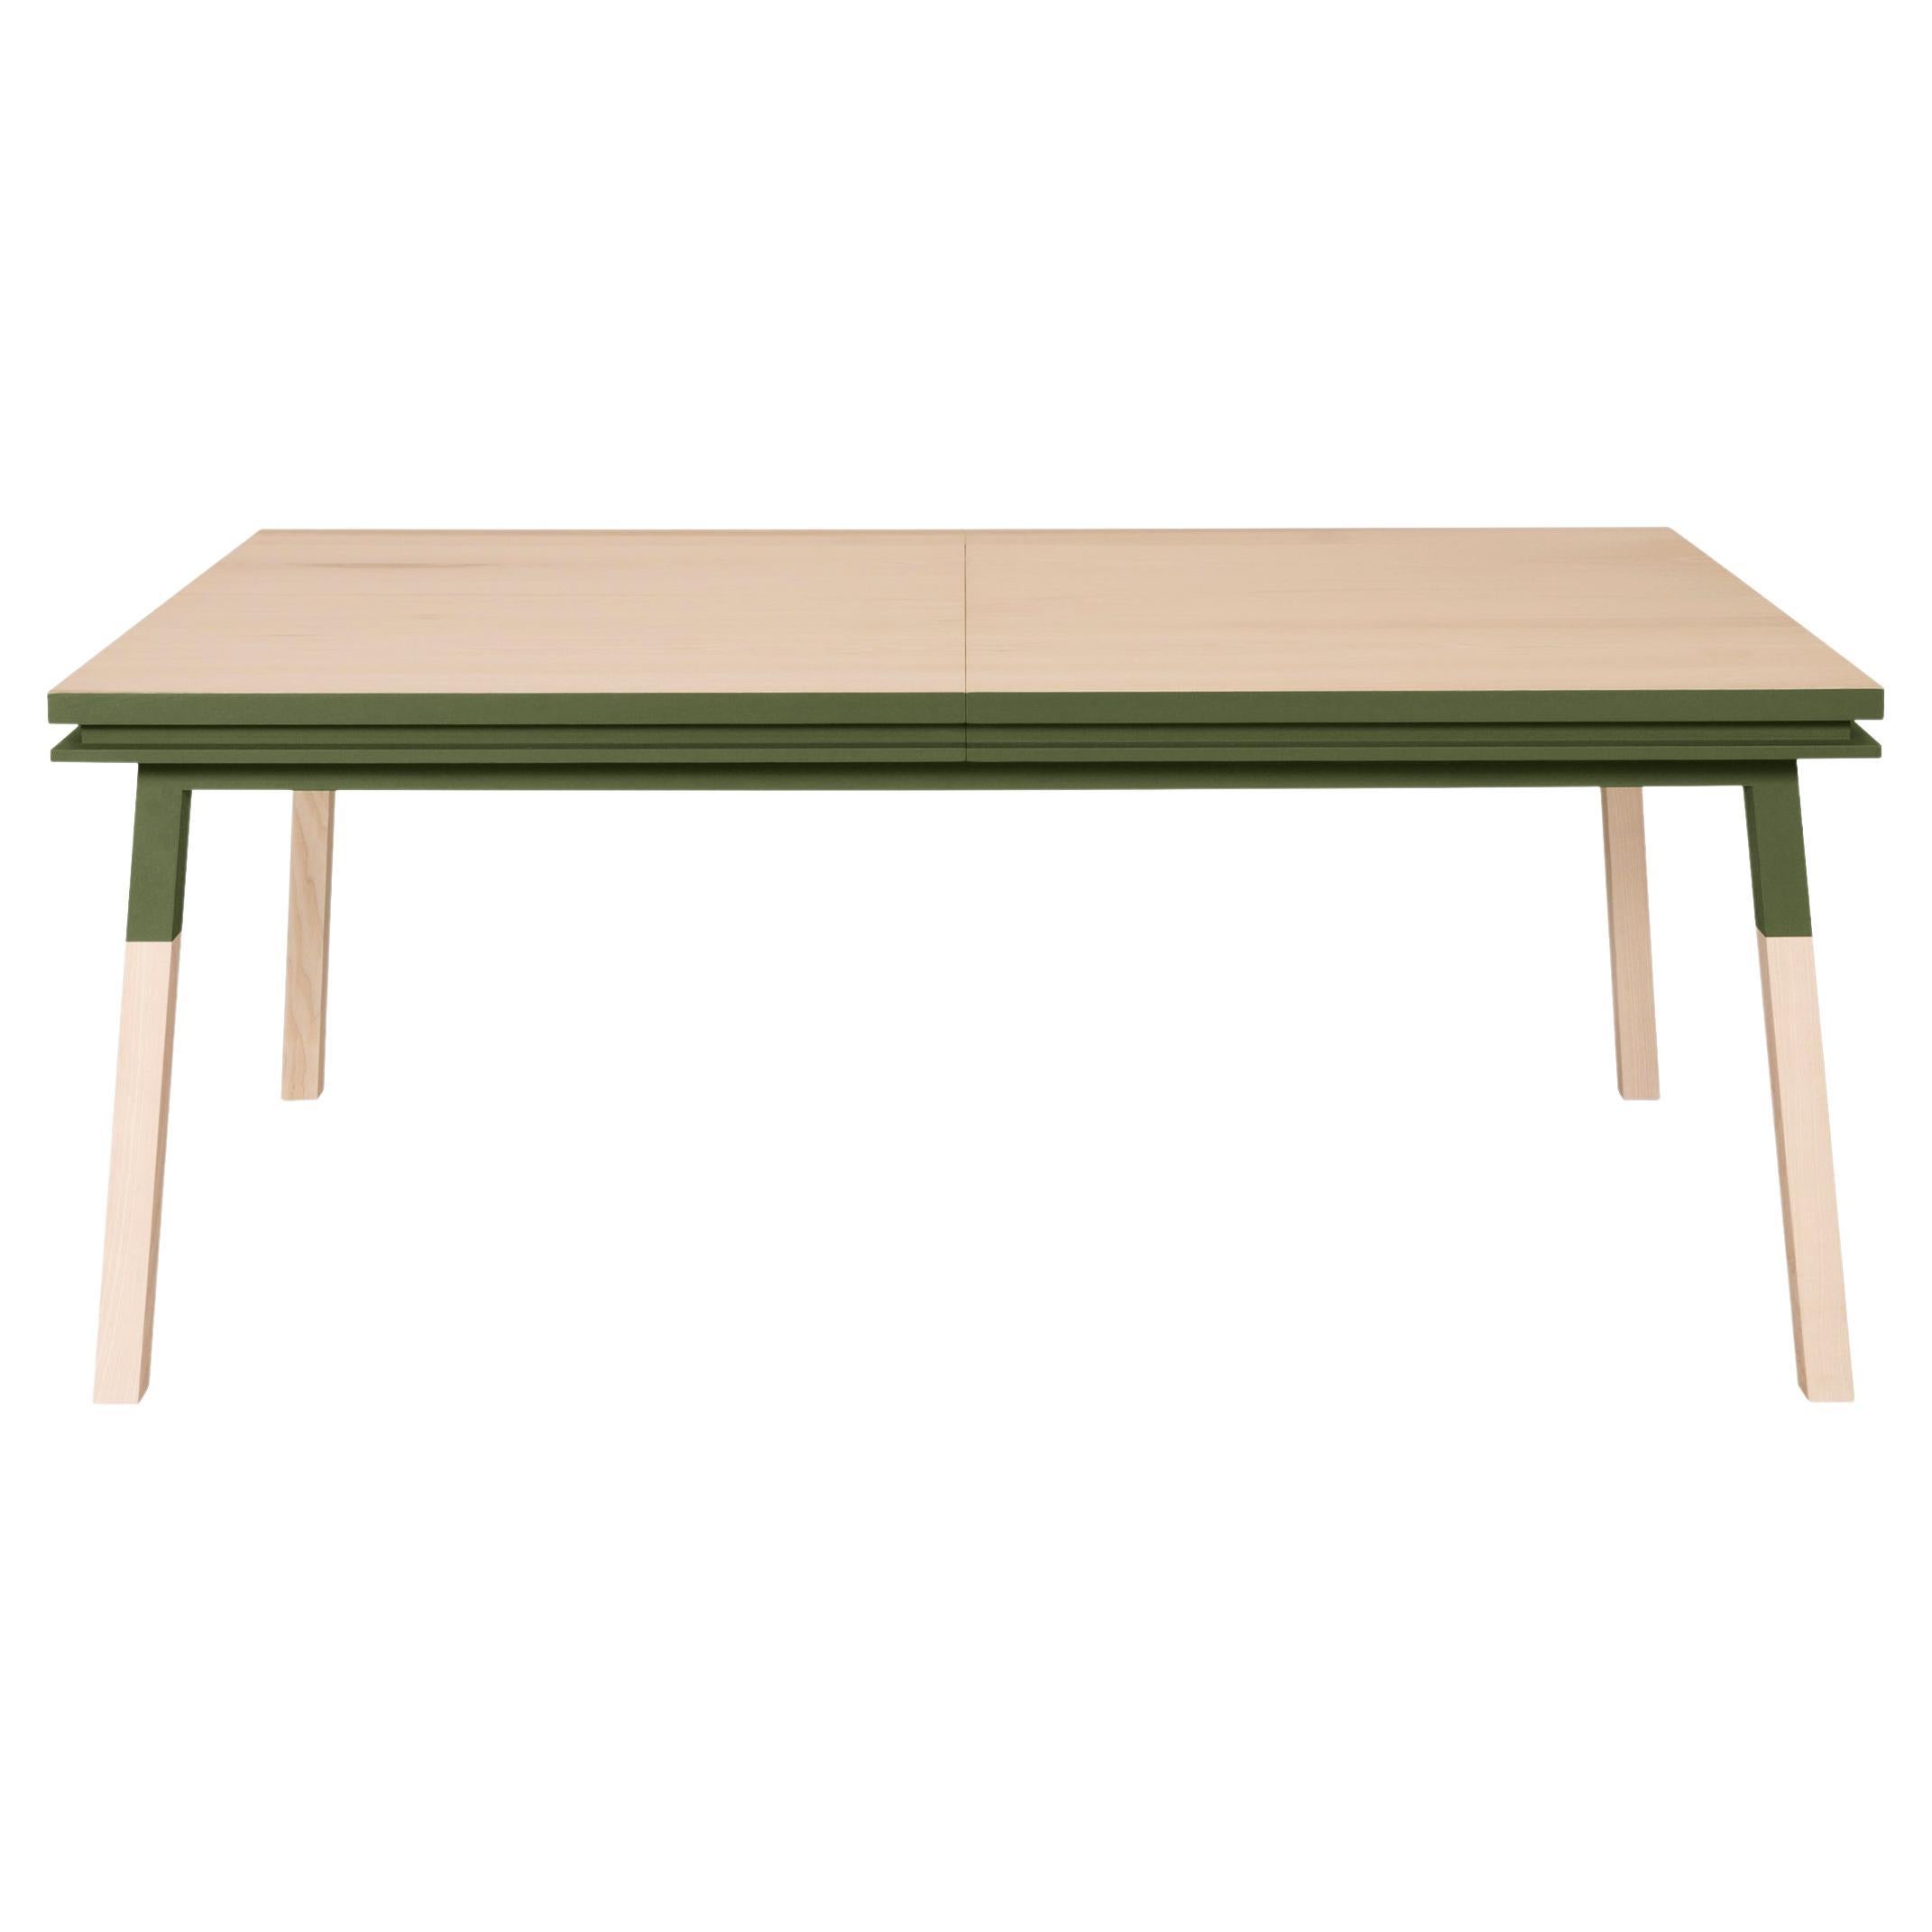 Green & natural wood extensible dining table in solid wood, design E. Gizard For Sale